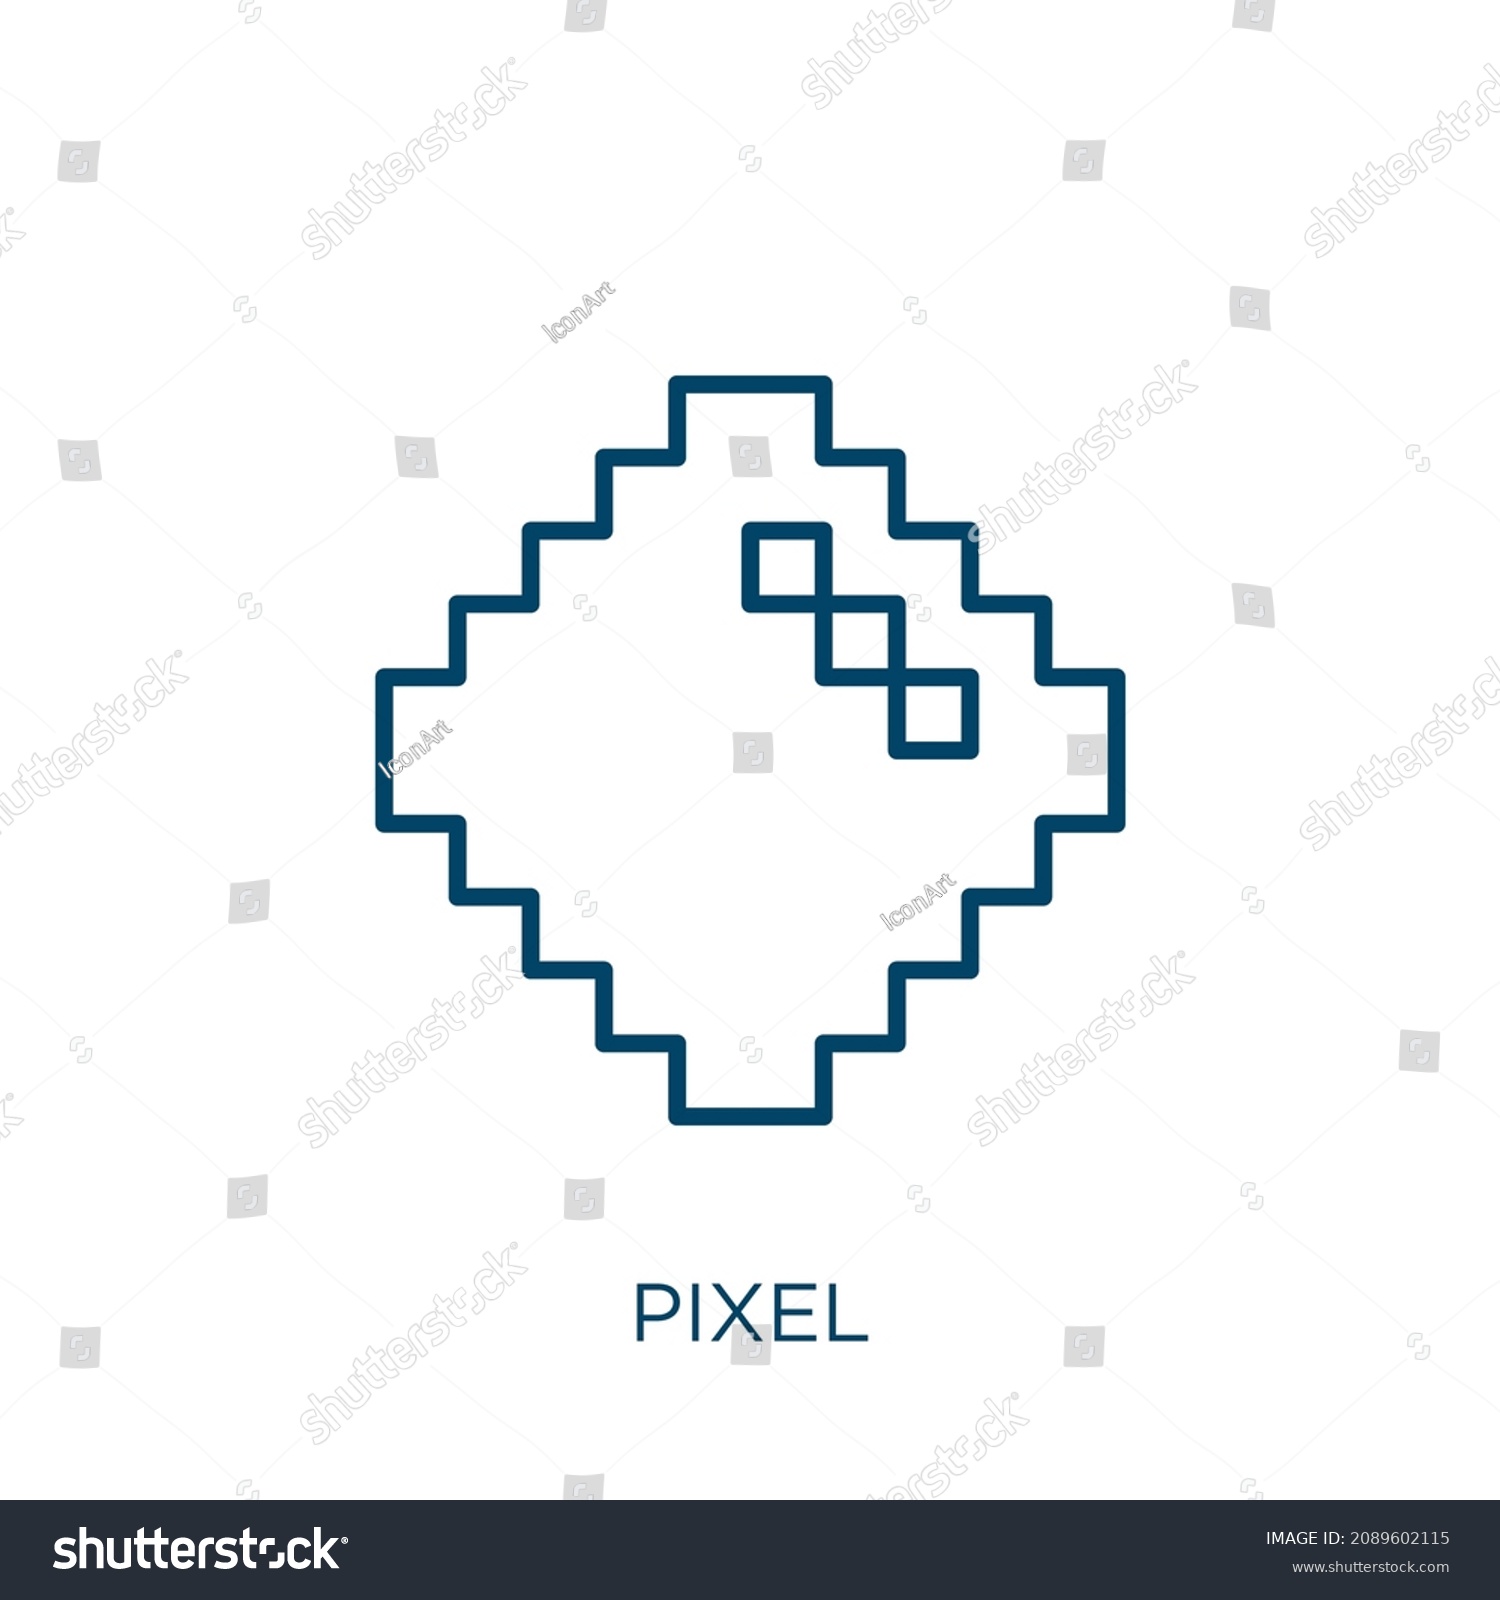 Pixel Icon Thin Linear Pixel Outline Stock Vector Royalty Free